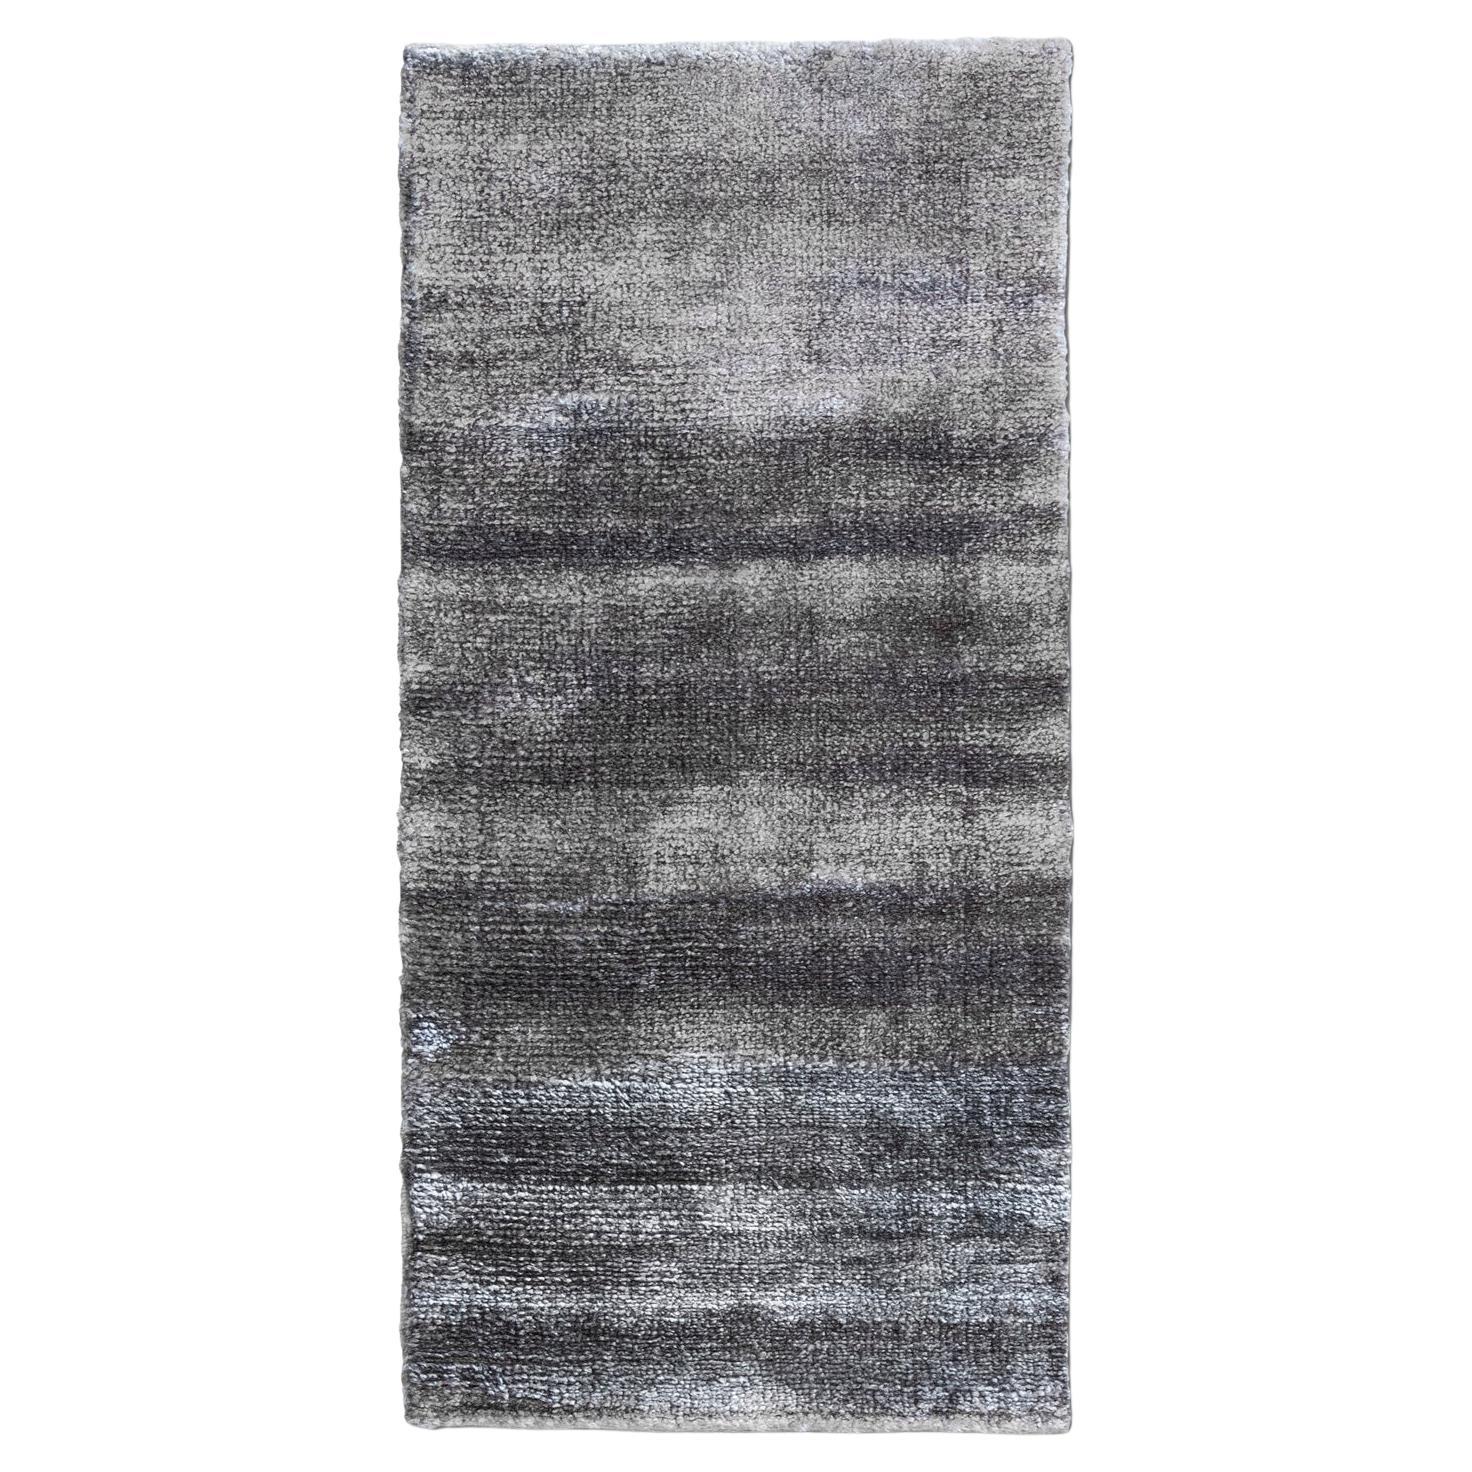 21st Cent Luxury Shiny Velvety Silvery Rug by Deanna Comellini In Stock 60x120cm For Sale